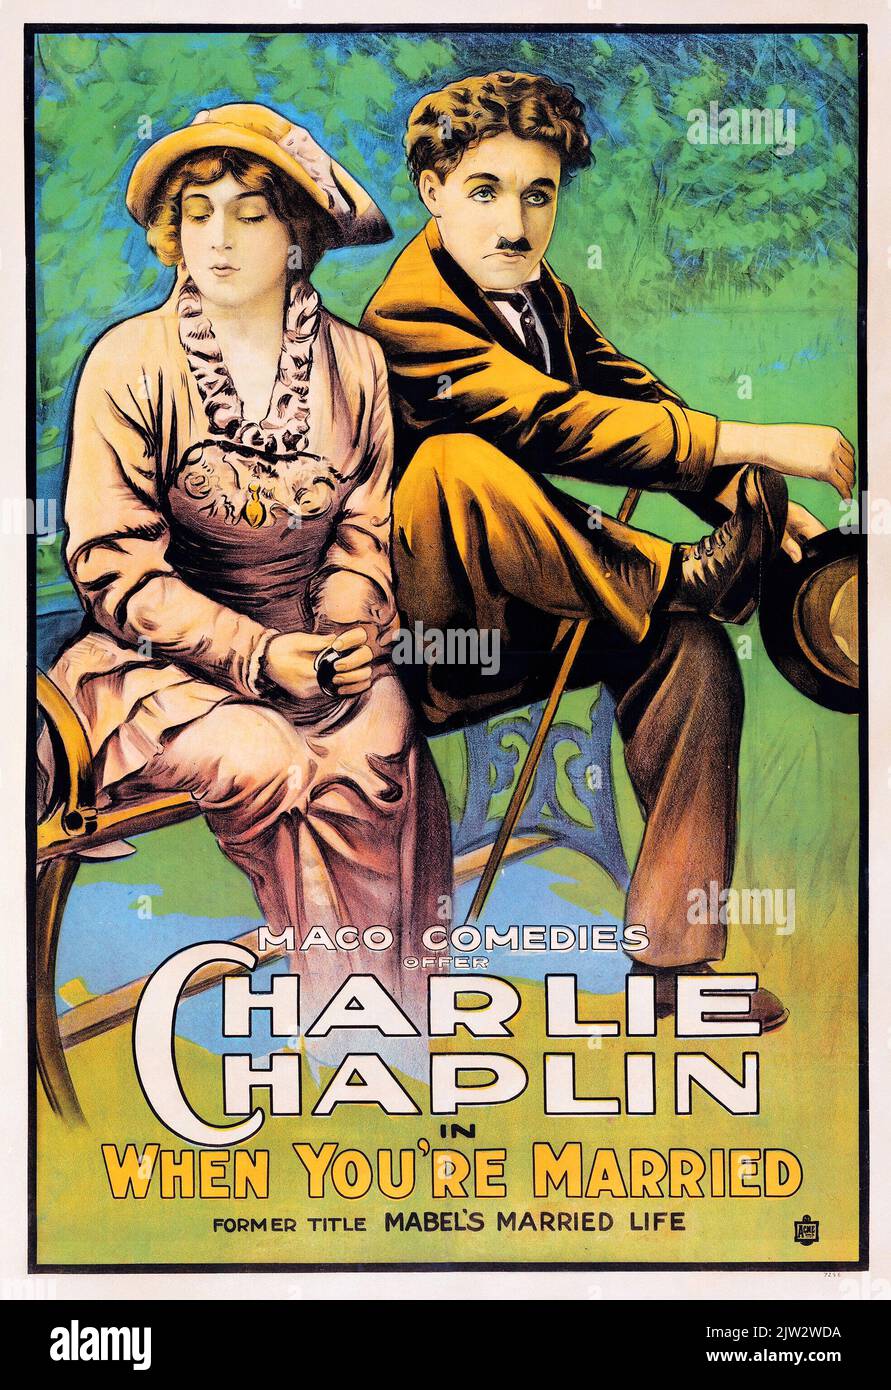 Charlie Chaplin in Mabel's Married Life (Maco Comedies, R-1920s). Reissue Title - When You're Married Stock Photo